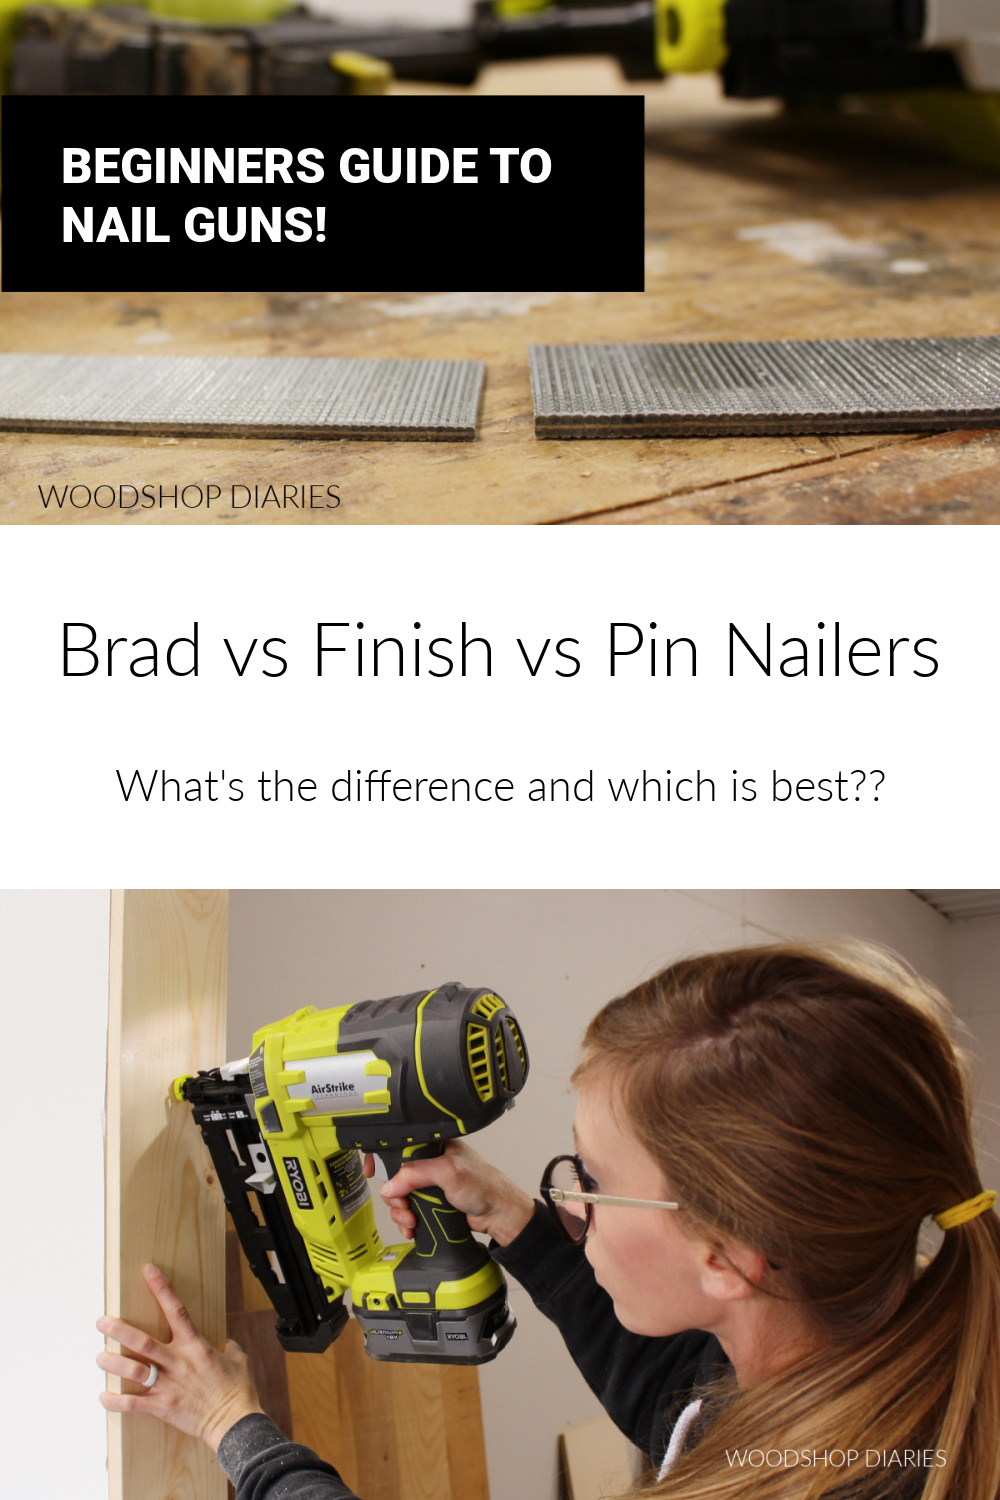 Pinterest collage image showing "beginners guide to nail guns" with image of nails and Shara Woodshop Diaries using nail gun to secure door trim